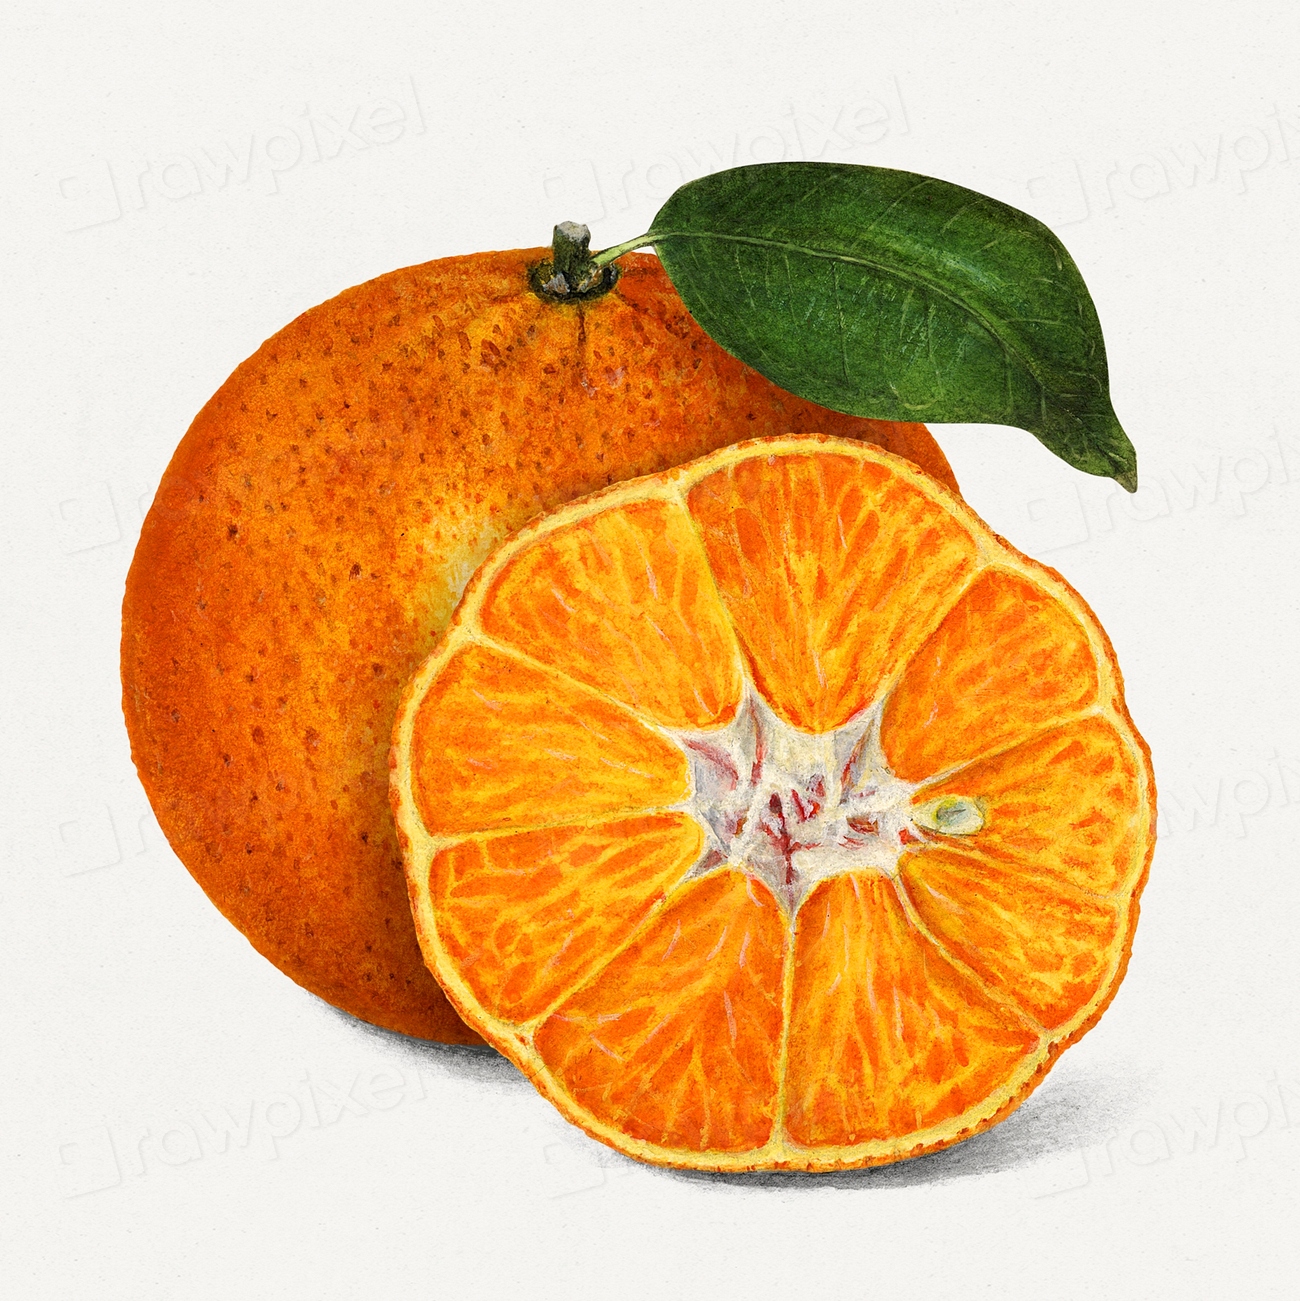 The picture shows half of orange and a pomegranate